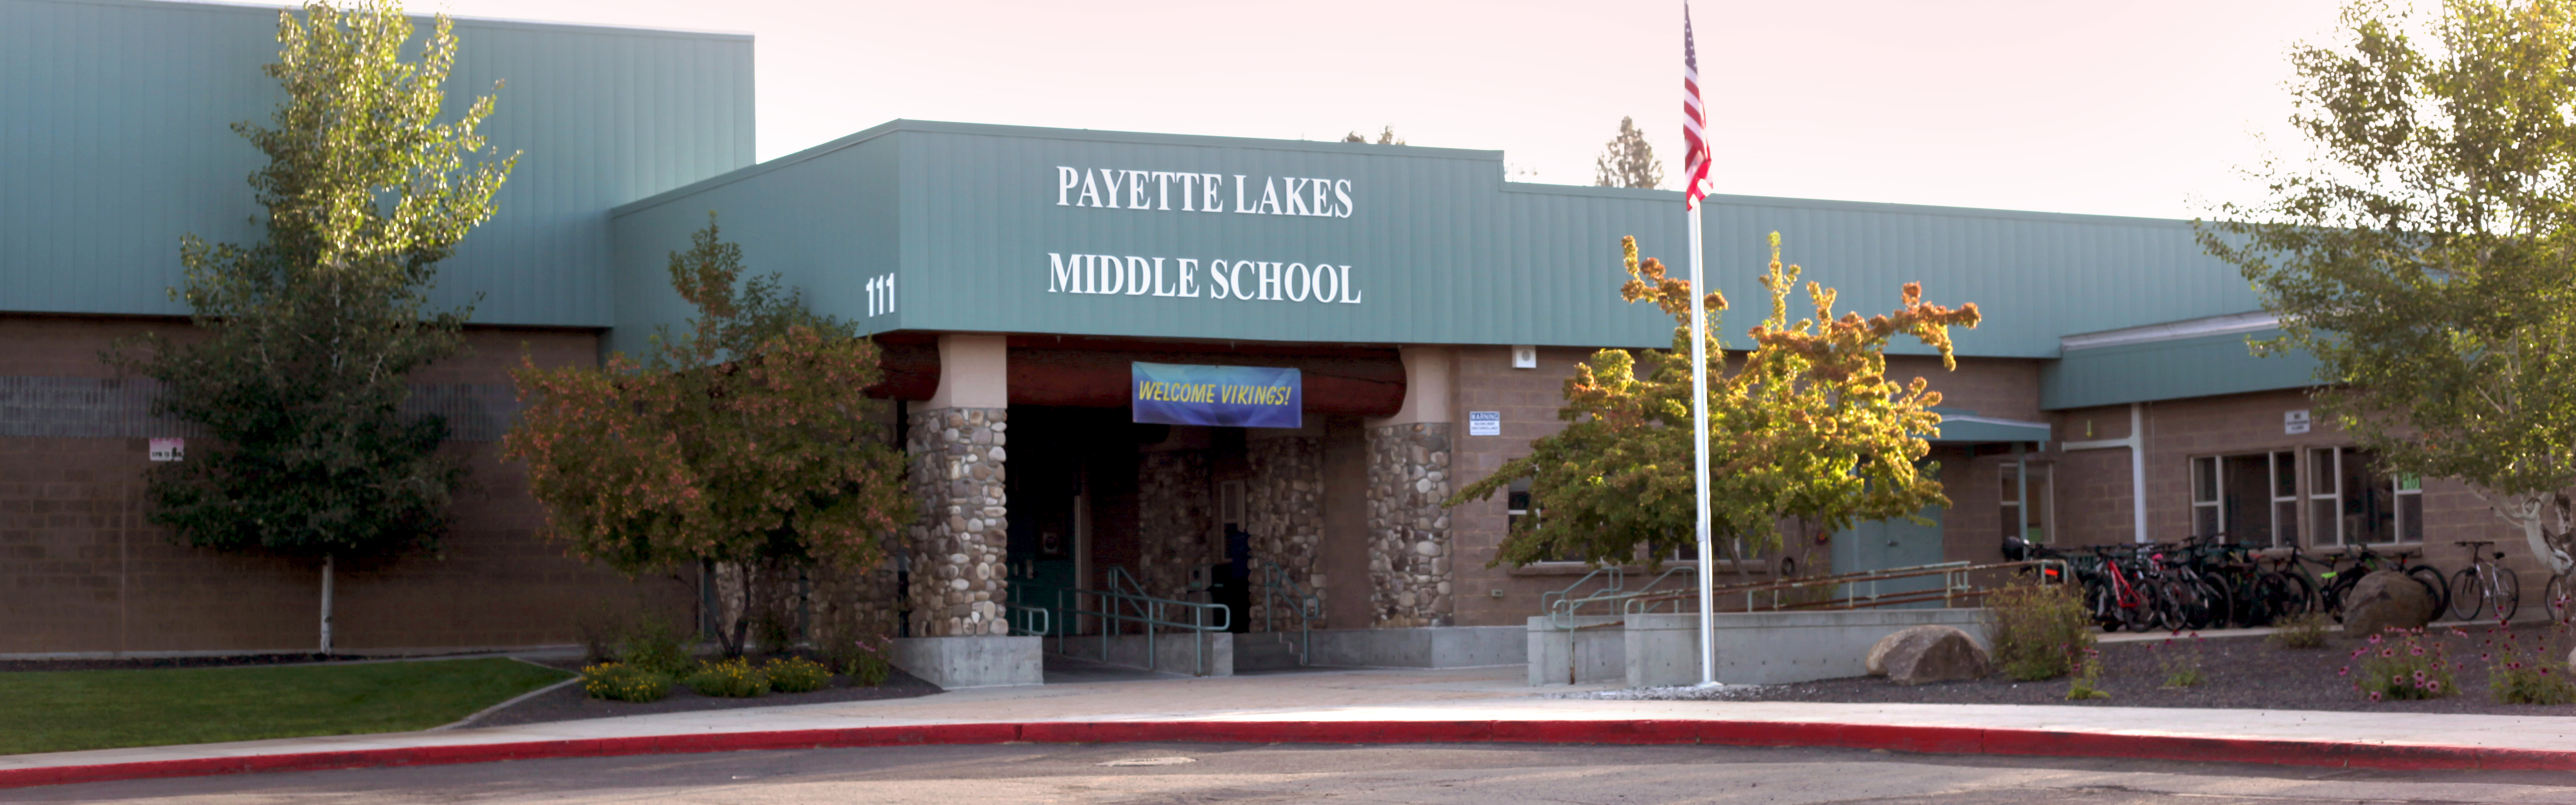 Payette Lakes Middle School building exterior